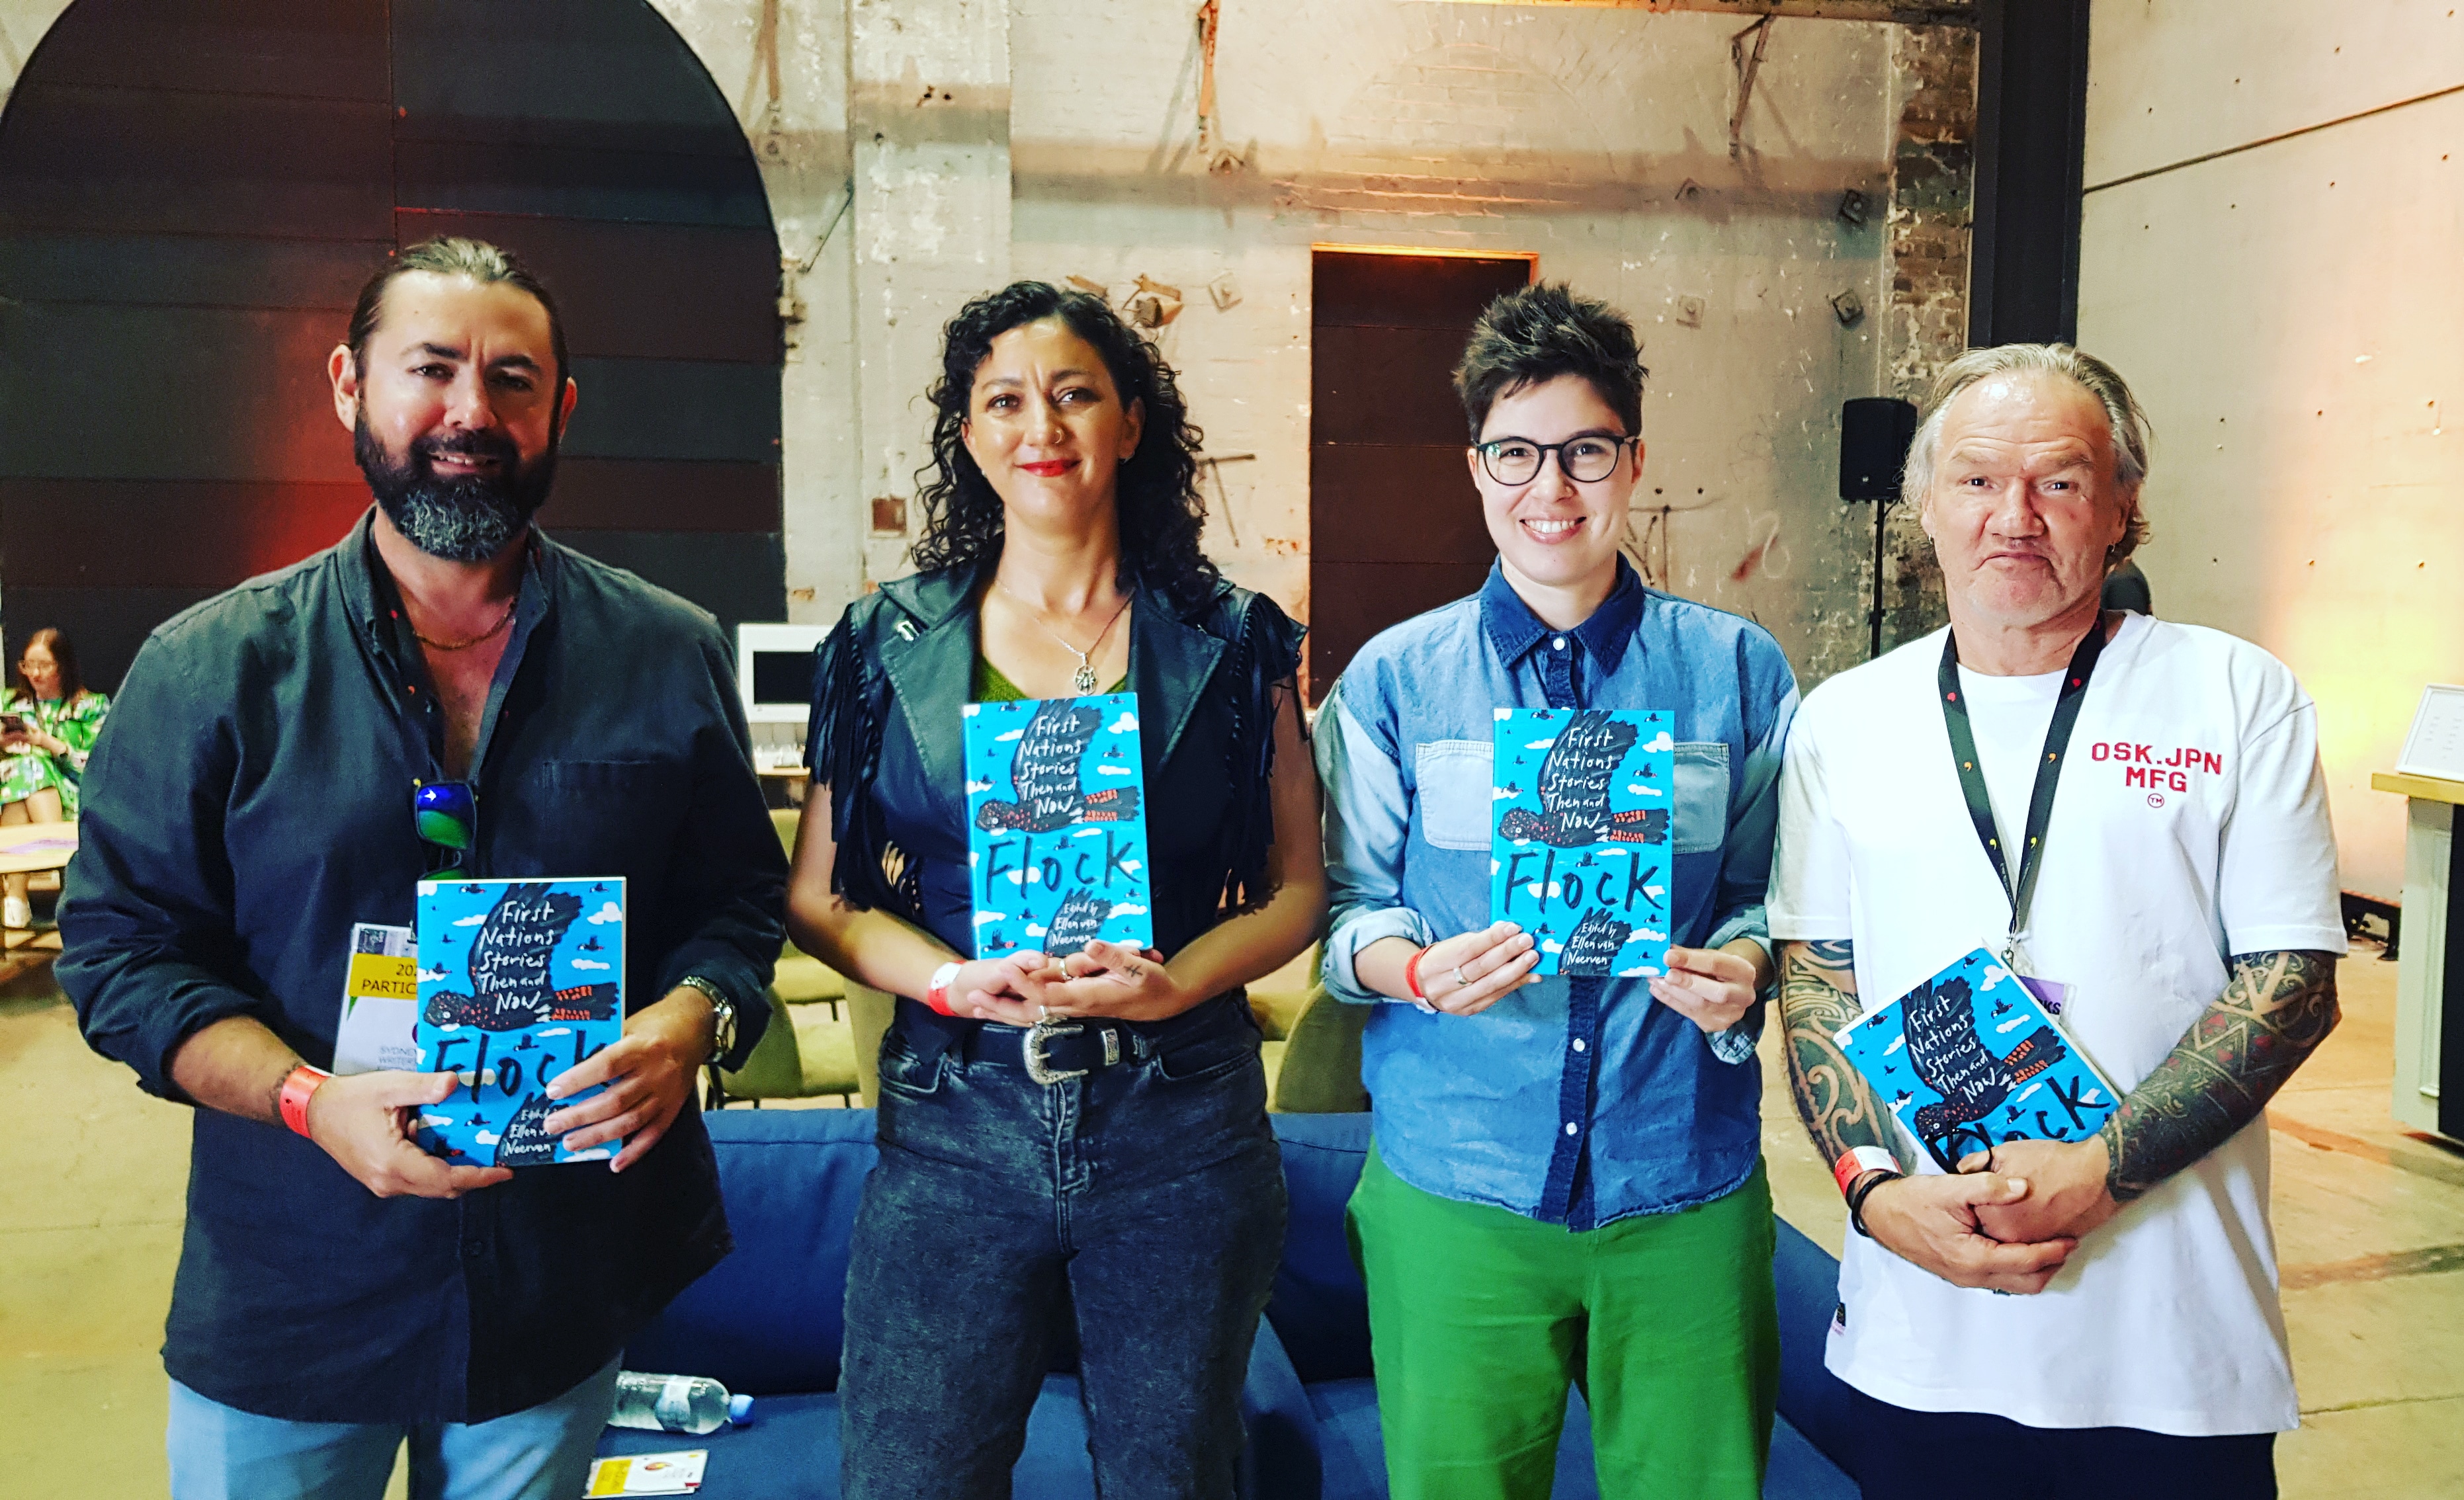 Adam Thompson, Mykaela Saunders, Ellen van Neerven and Tony Birch stand in front of a couch smiling and holding copies of the anthology, Flock